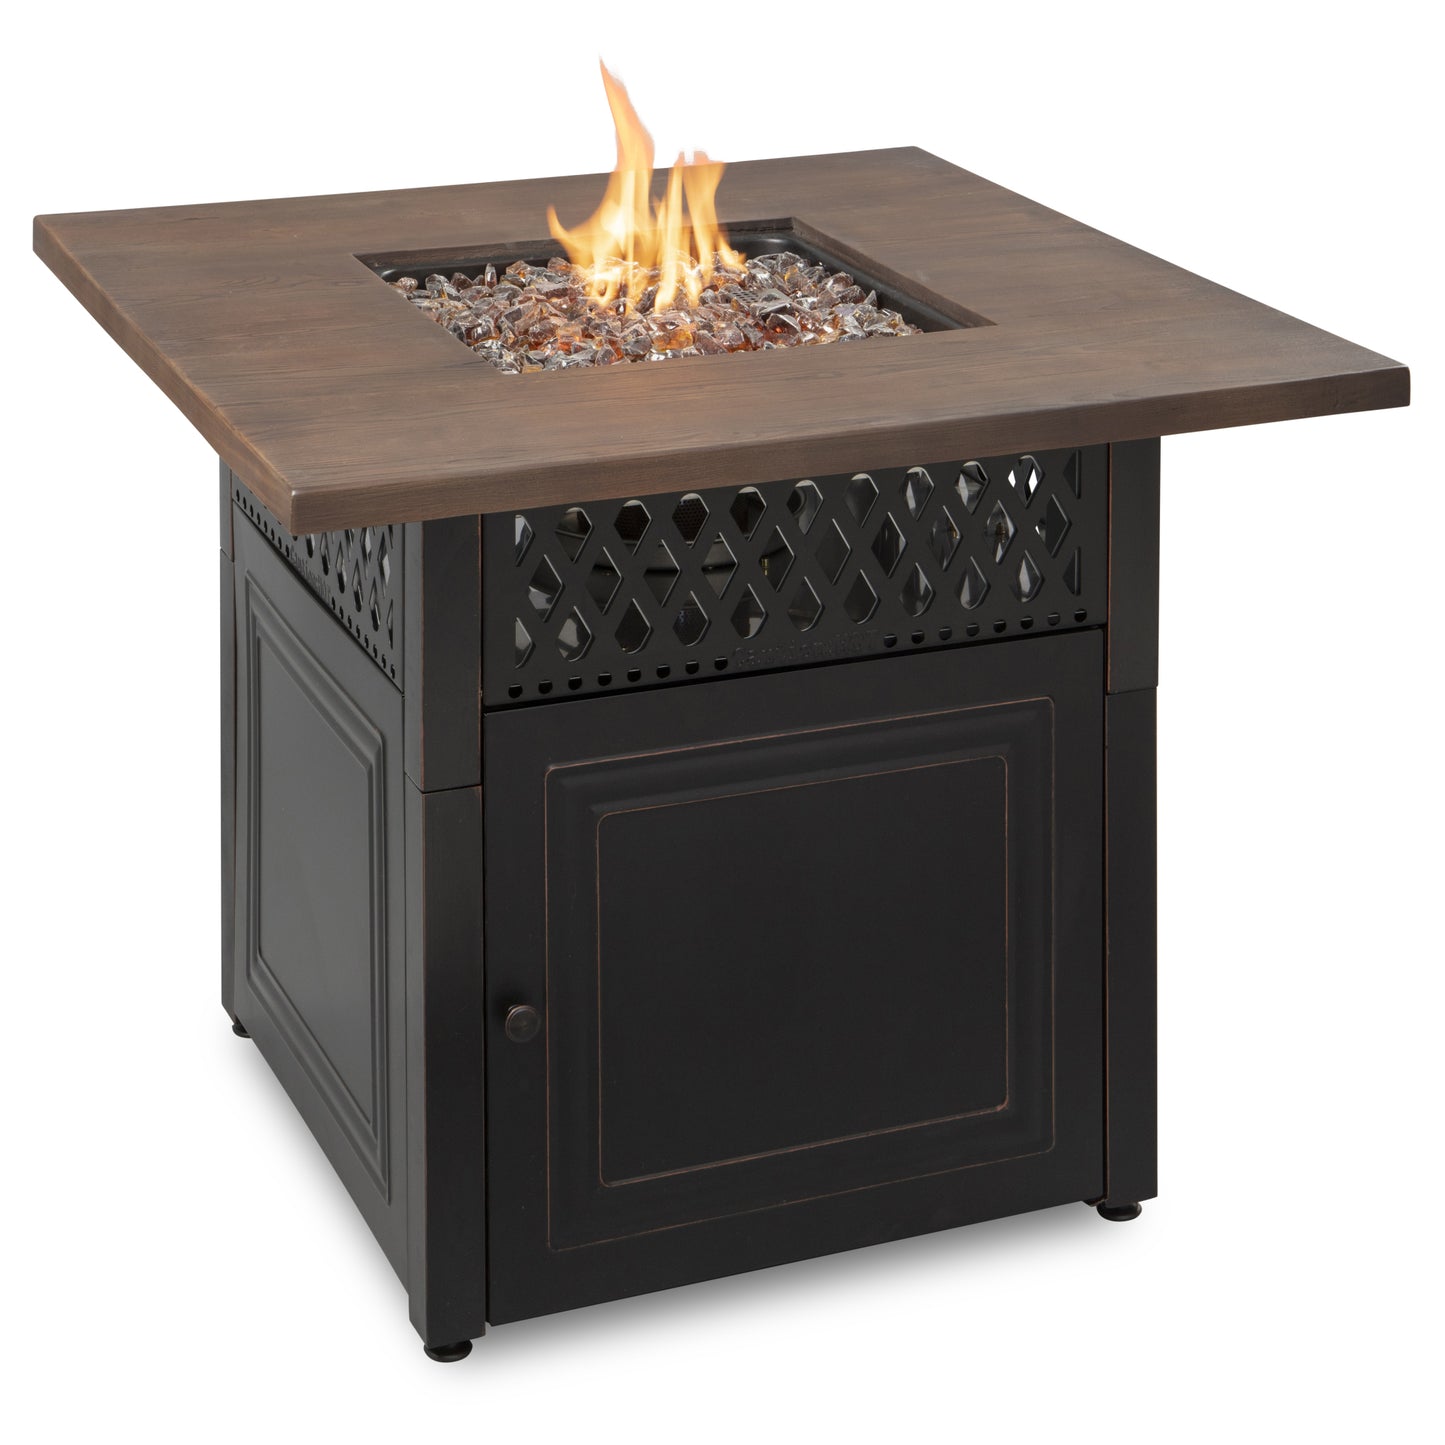 Endless Summer The Donovan, Dual Heat LP Gas Outdoor Fire Pit/Patio Heater with Wood Look Resin Mantel GAD19102ES freeshipping - Luxury Tech Inc.